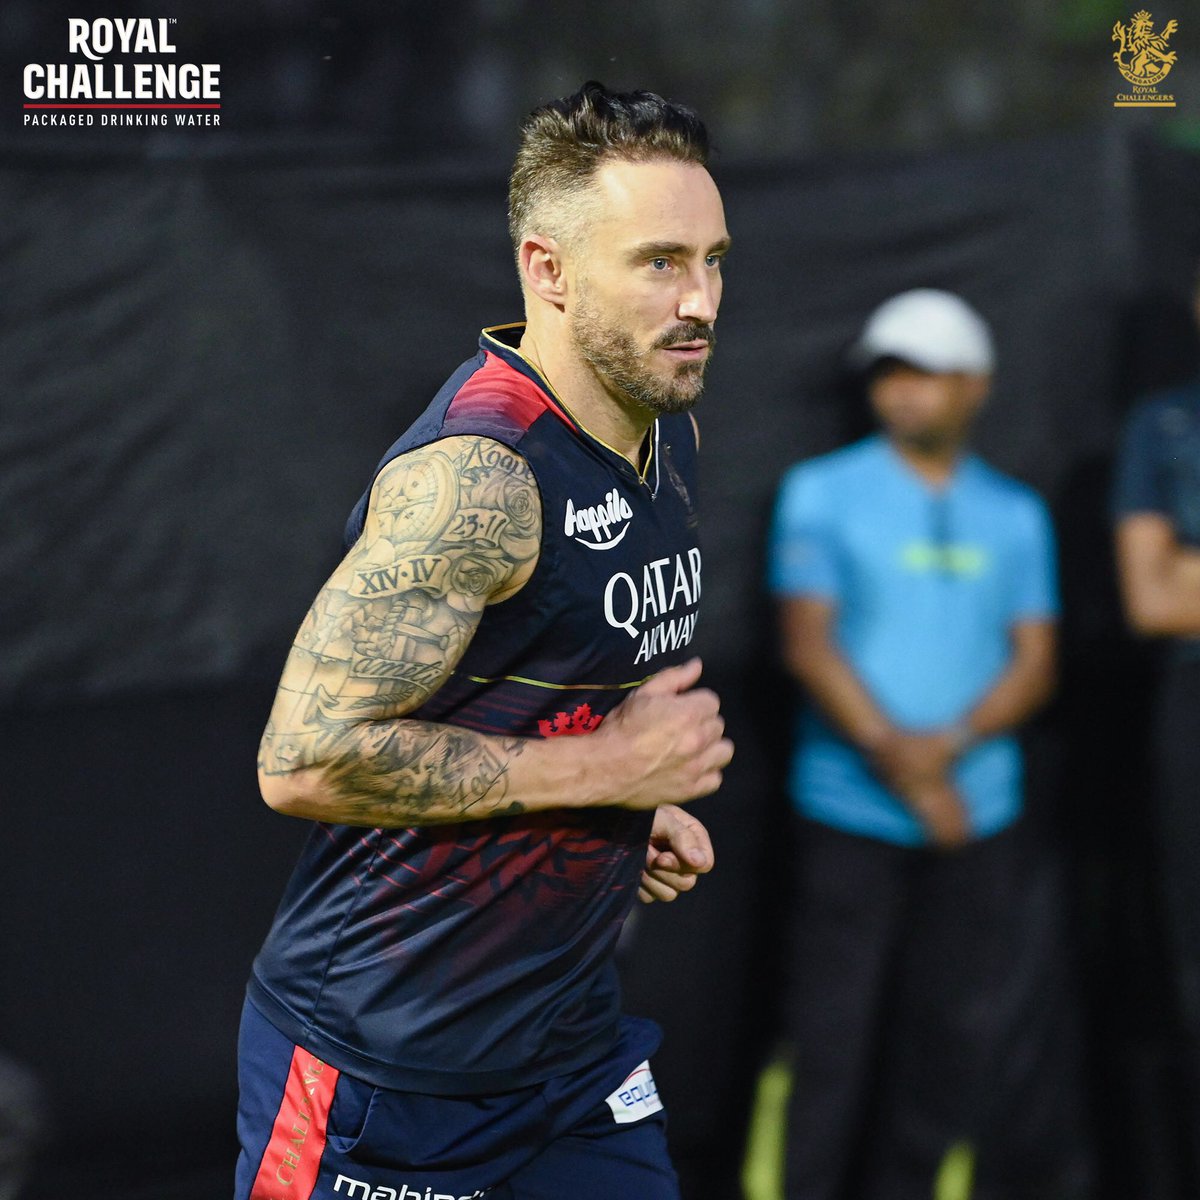 Royal Challenge Packaged Drinking Water Moment of the Day 📸

K.G.F. Hustle Mode 🔛

Gotta keep pushing forward no matter how big the hurdle is! 🏃

#PlayBold #ನಮ್ಮRCB #IPL2023 #Choosebold #RoyalChallenge